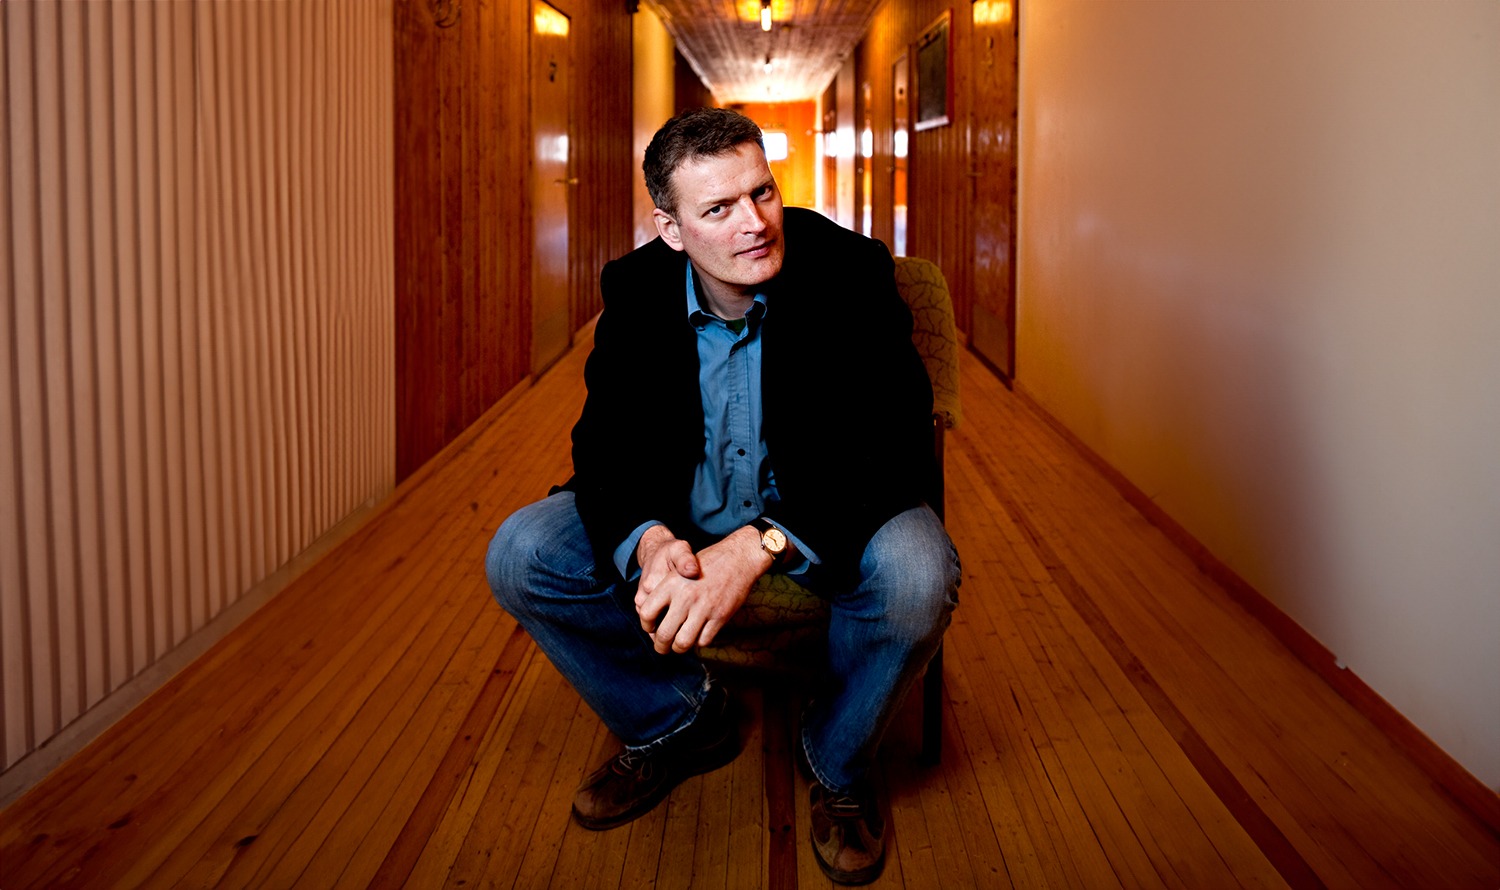 Portrait: Lars Mytting in a long hallway with old wooden floorboards, doors and a wooden ceiling, surrounded by warm light. It conveys an atmosphere of comfort and tradition. 